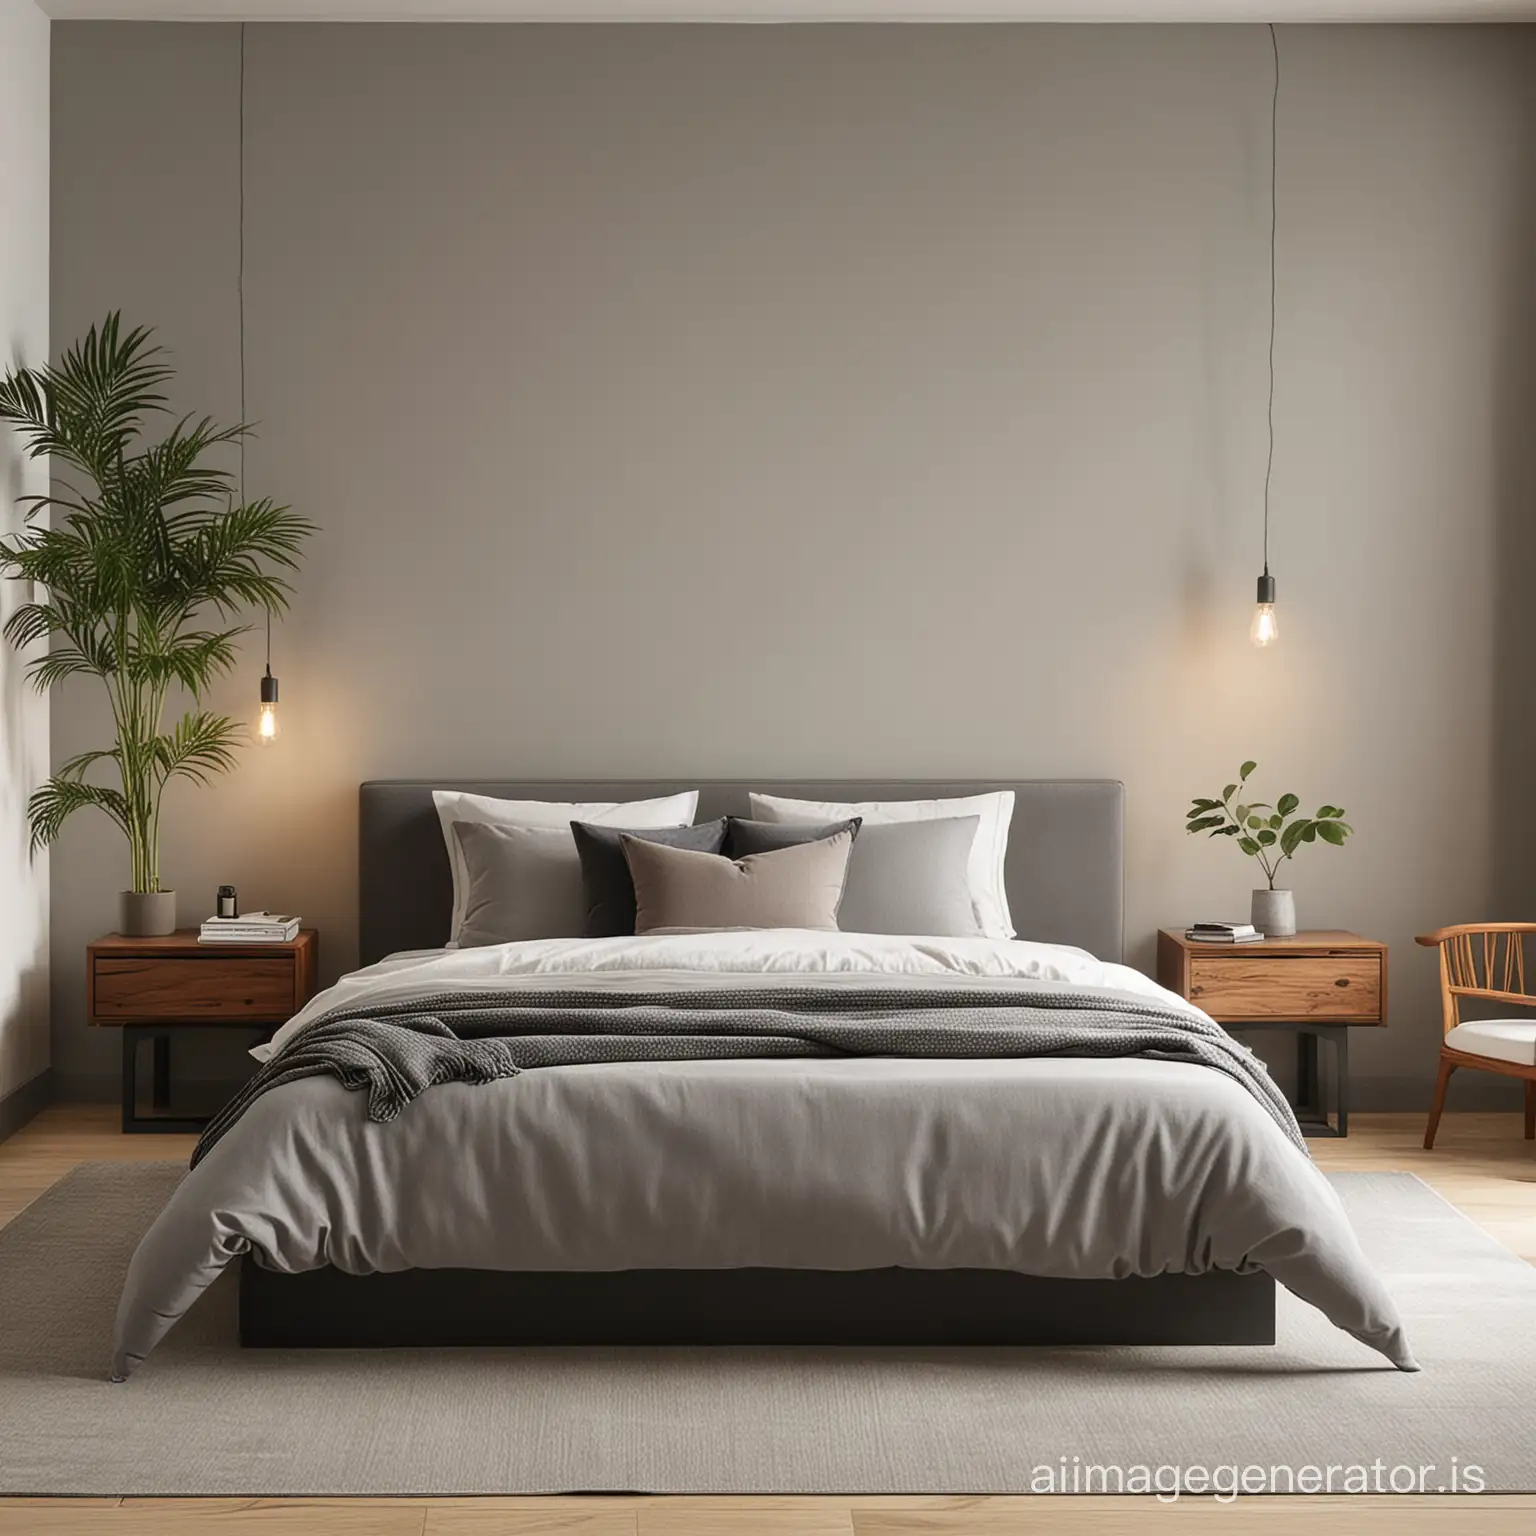 A japandi bedroom with a grey bed and modern furniture